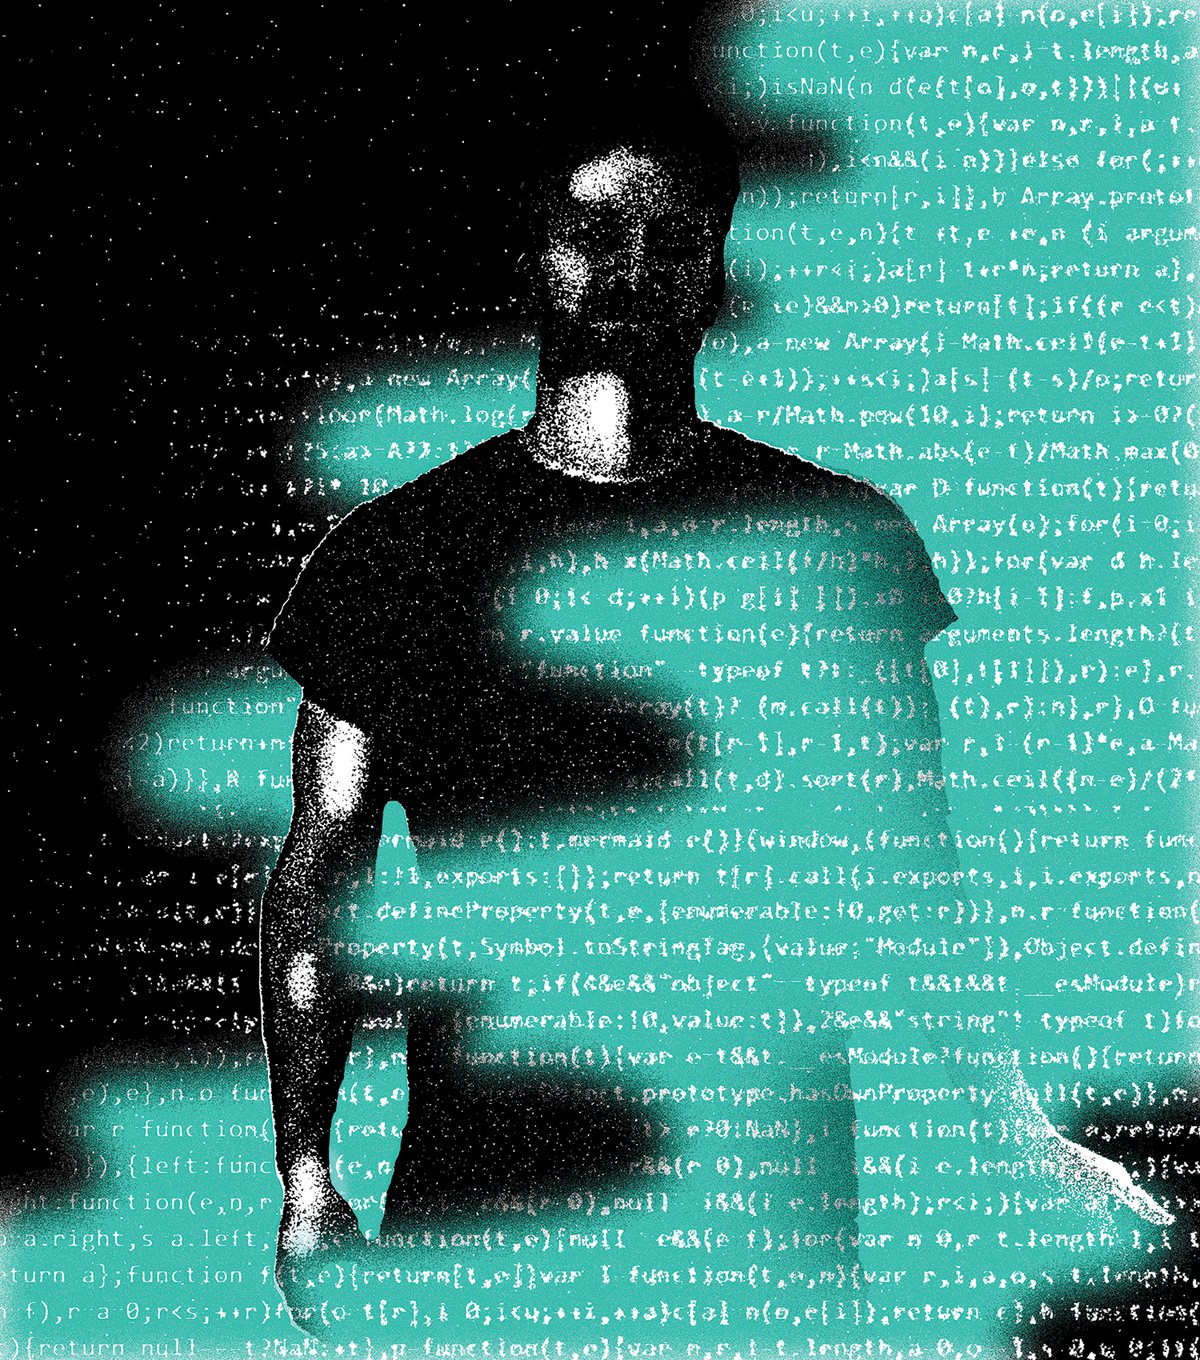 An illustration of a man with code overlaying the image.  